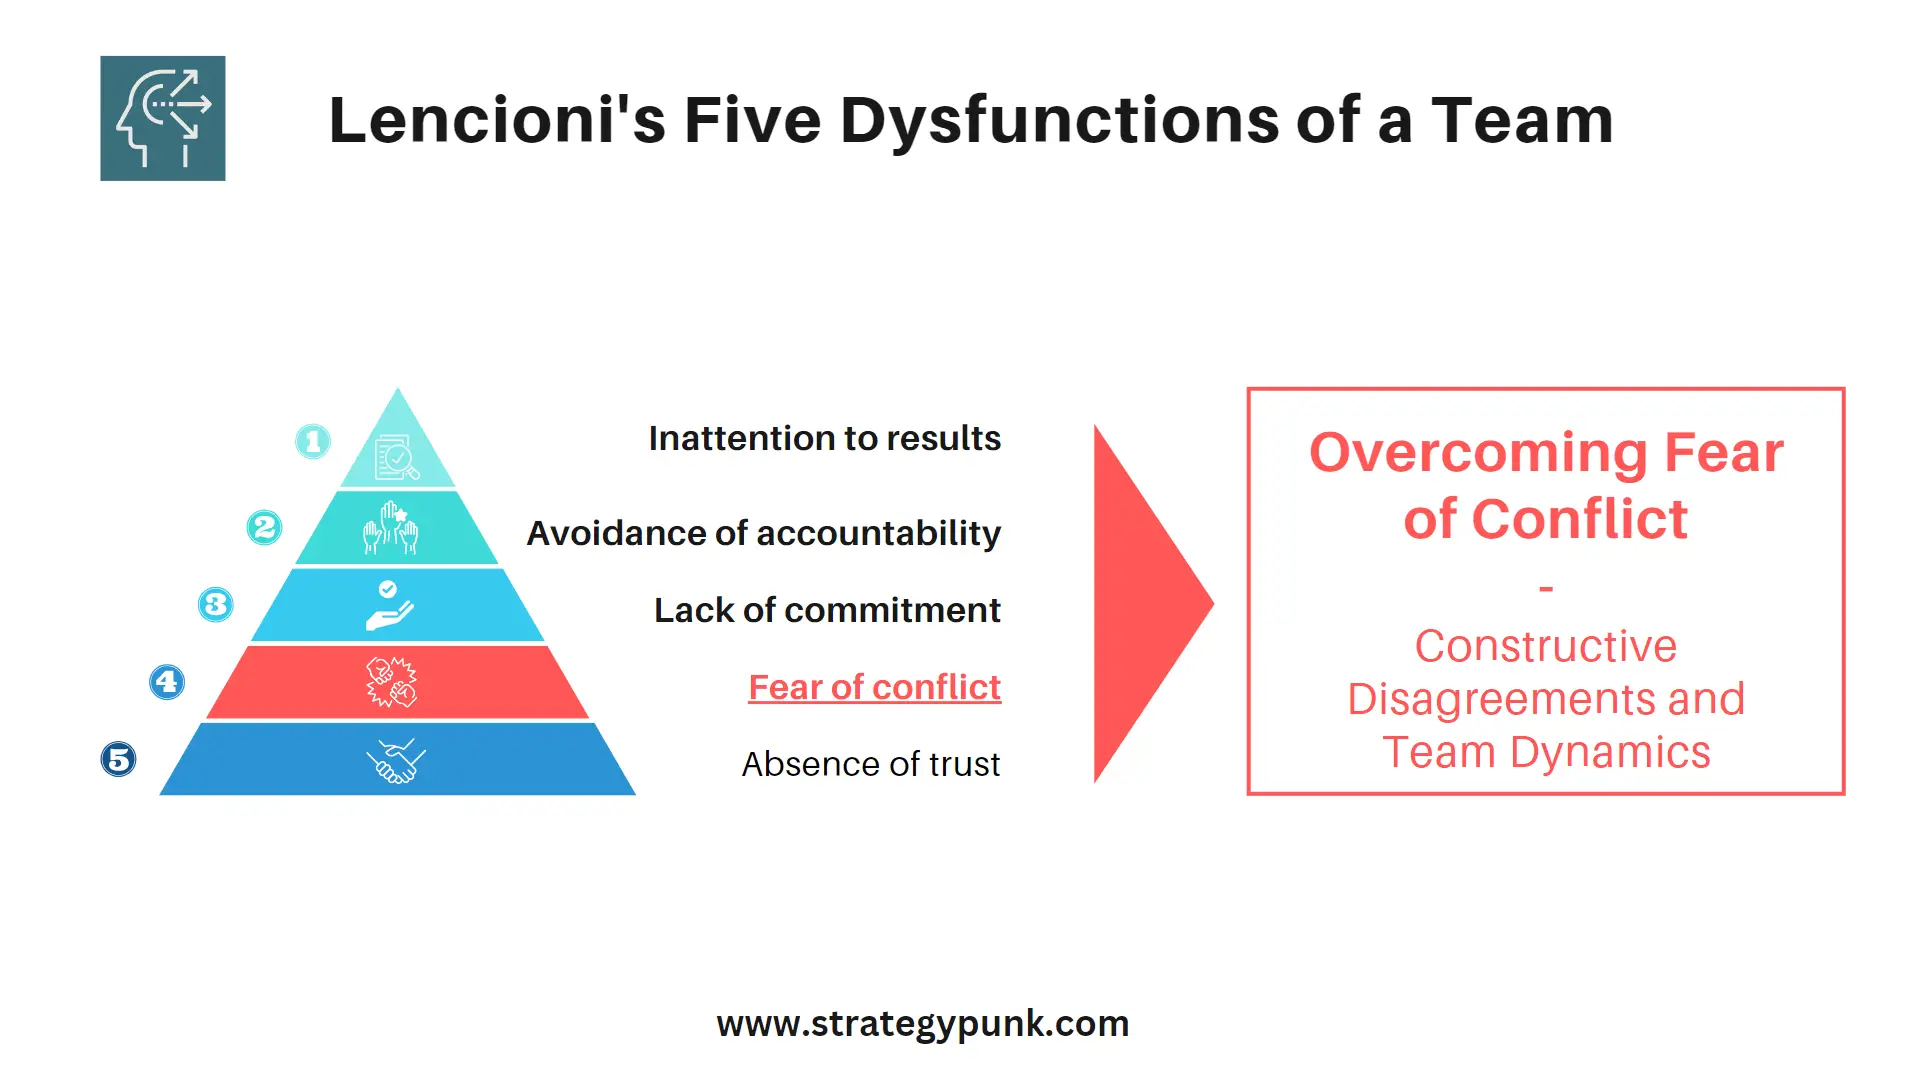 Overcoming Fear of Conflict: Constructive Disagreements and Team Dynamics